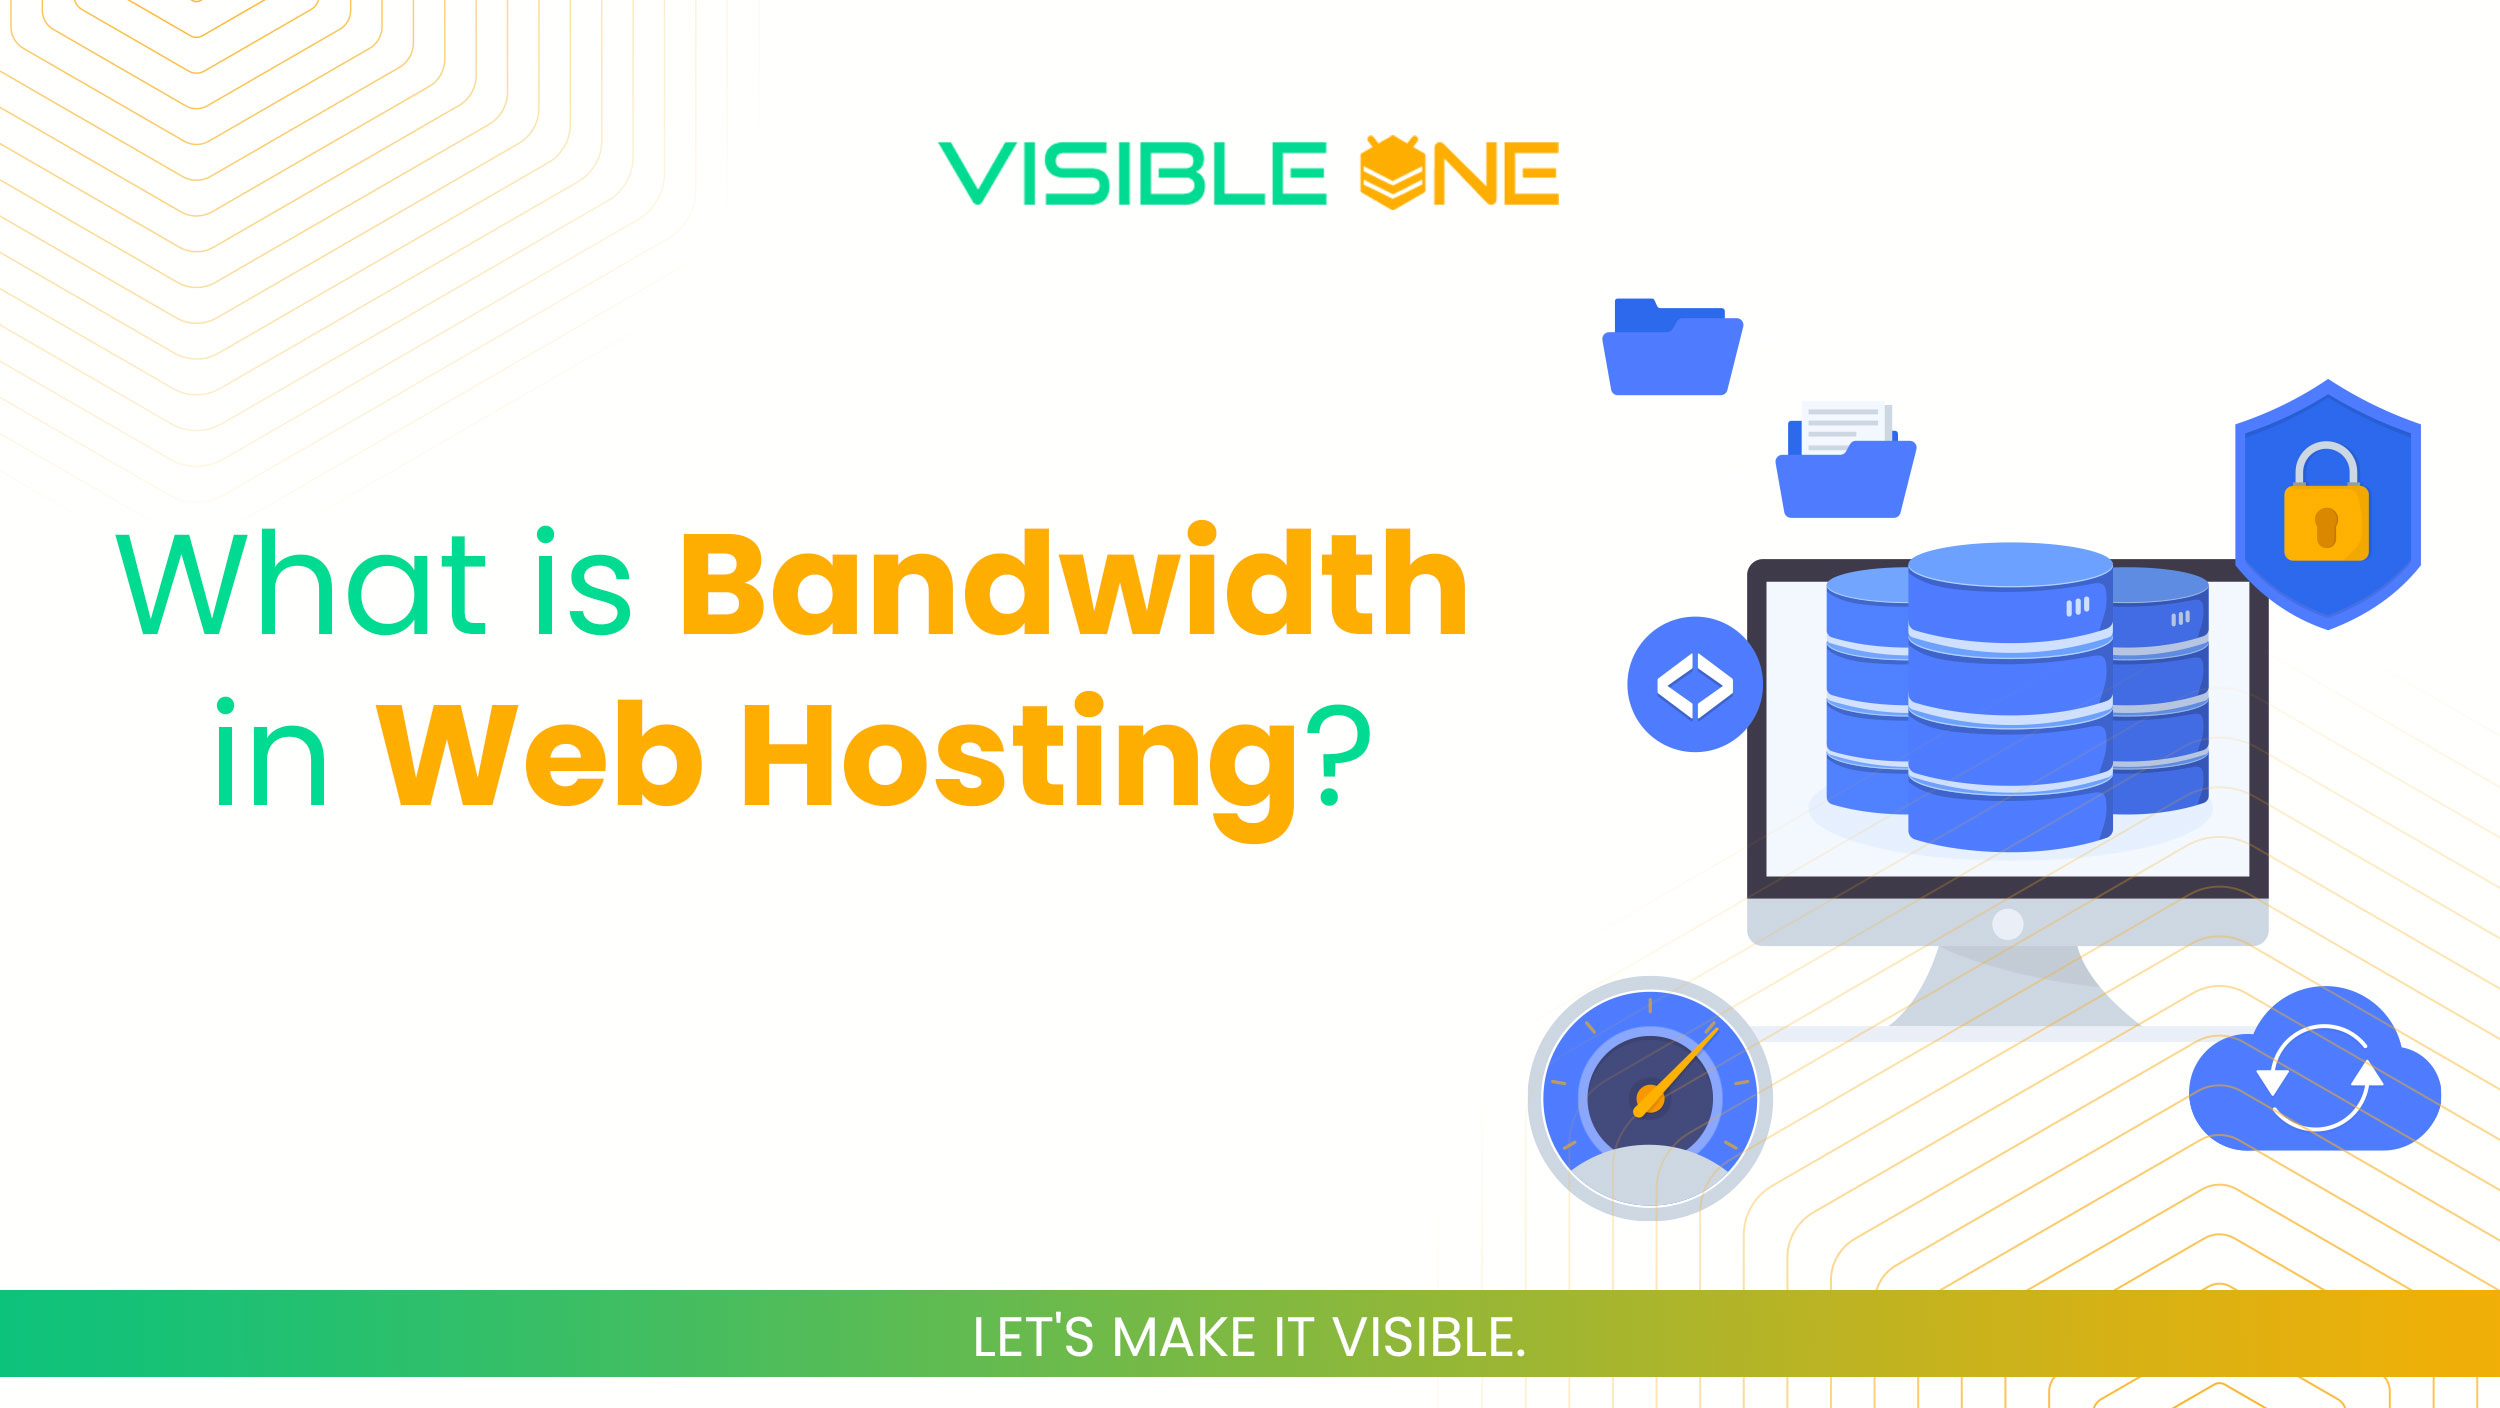 What is Bandwidth in Web Hosting?